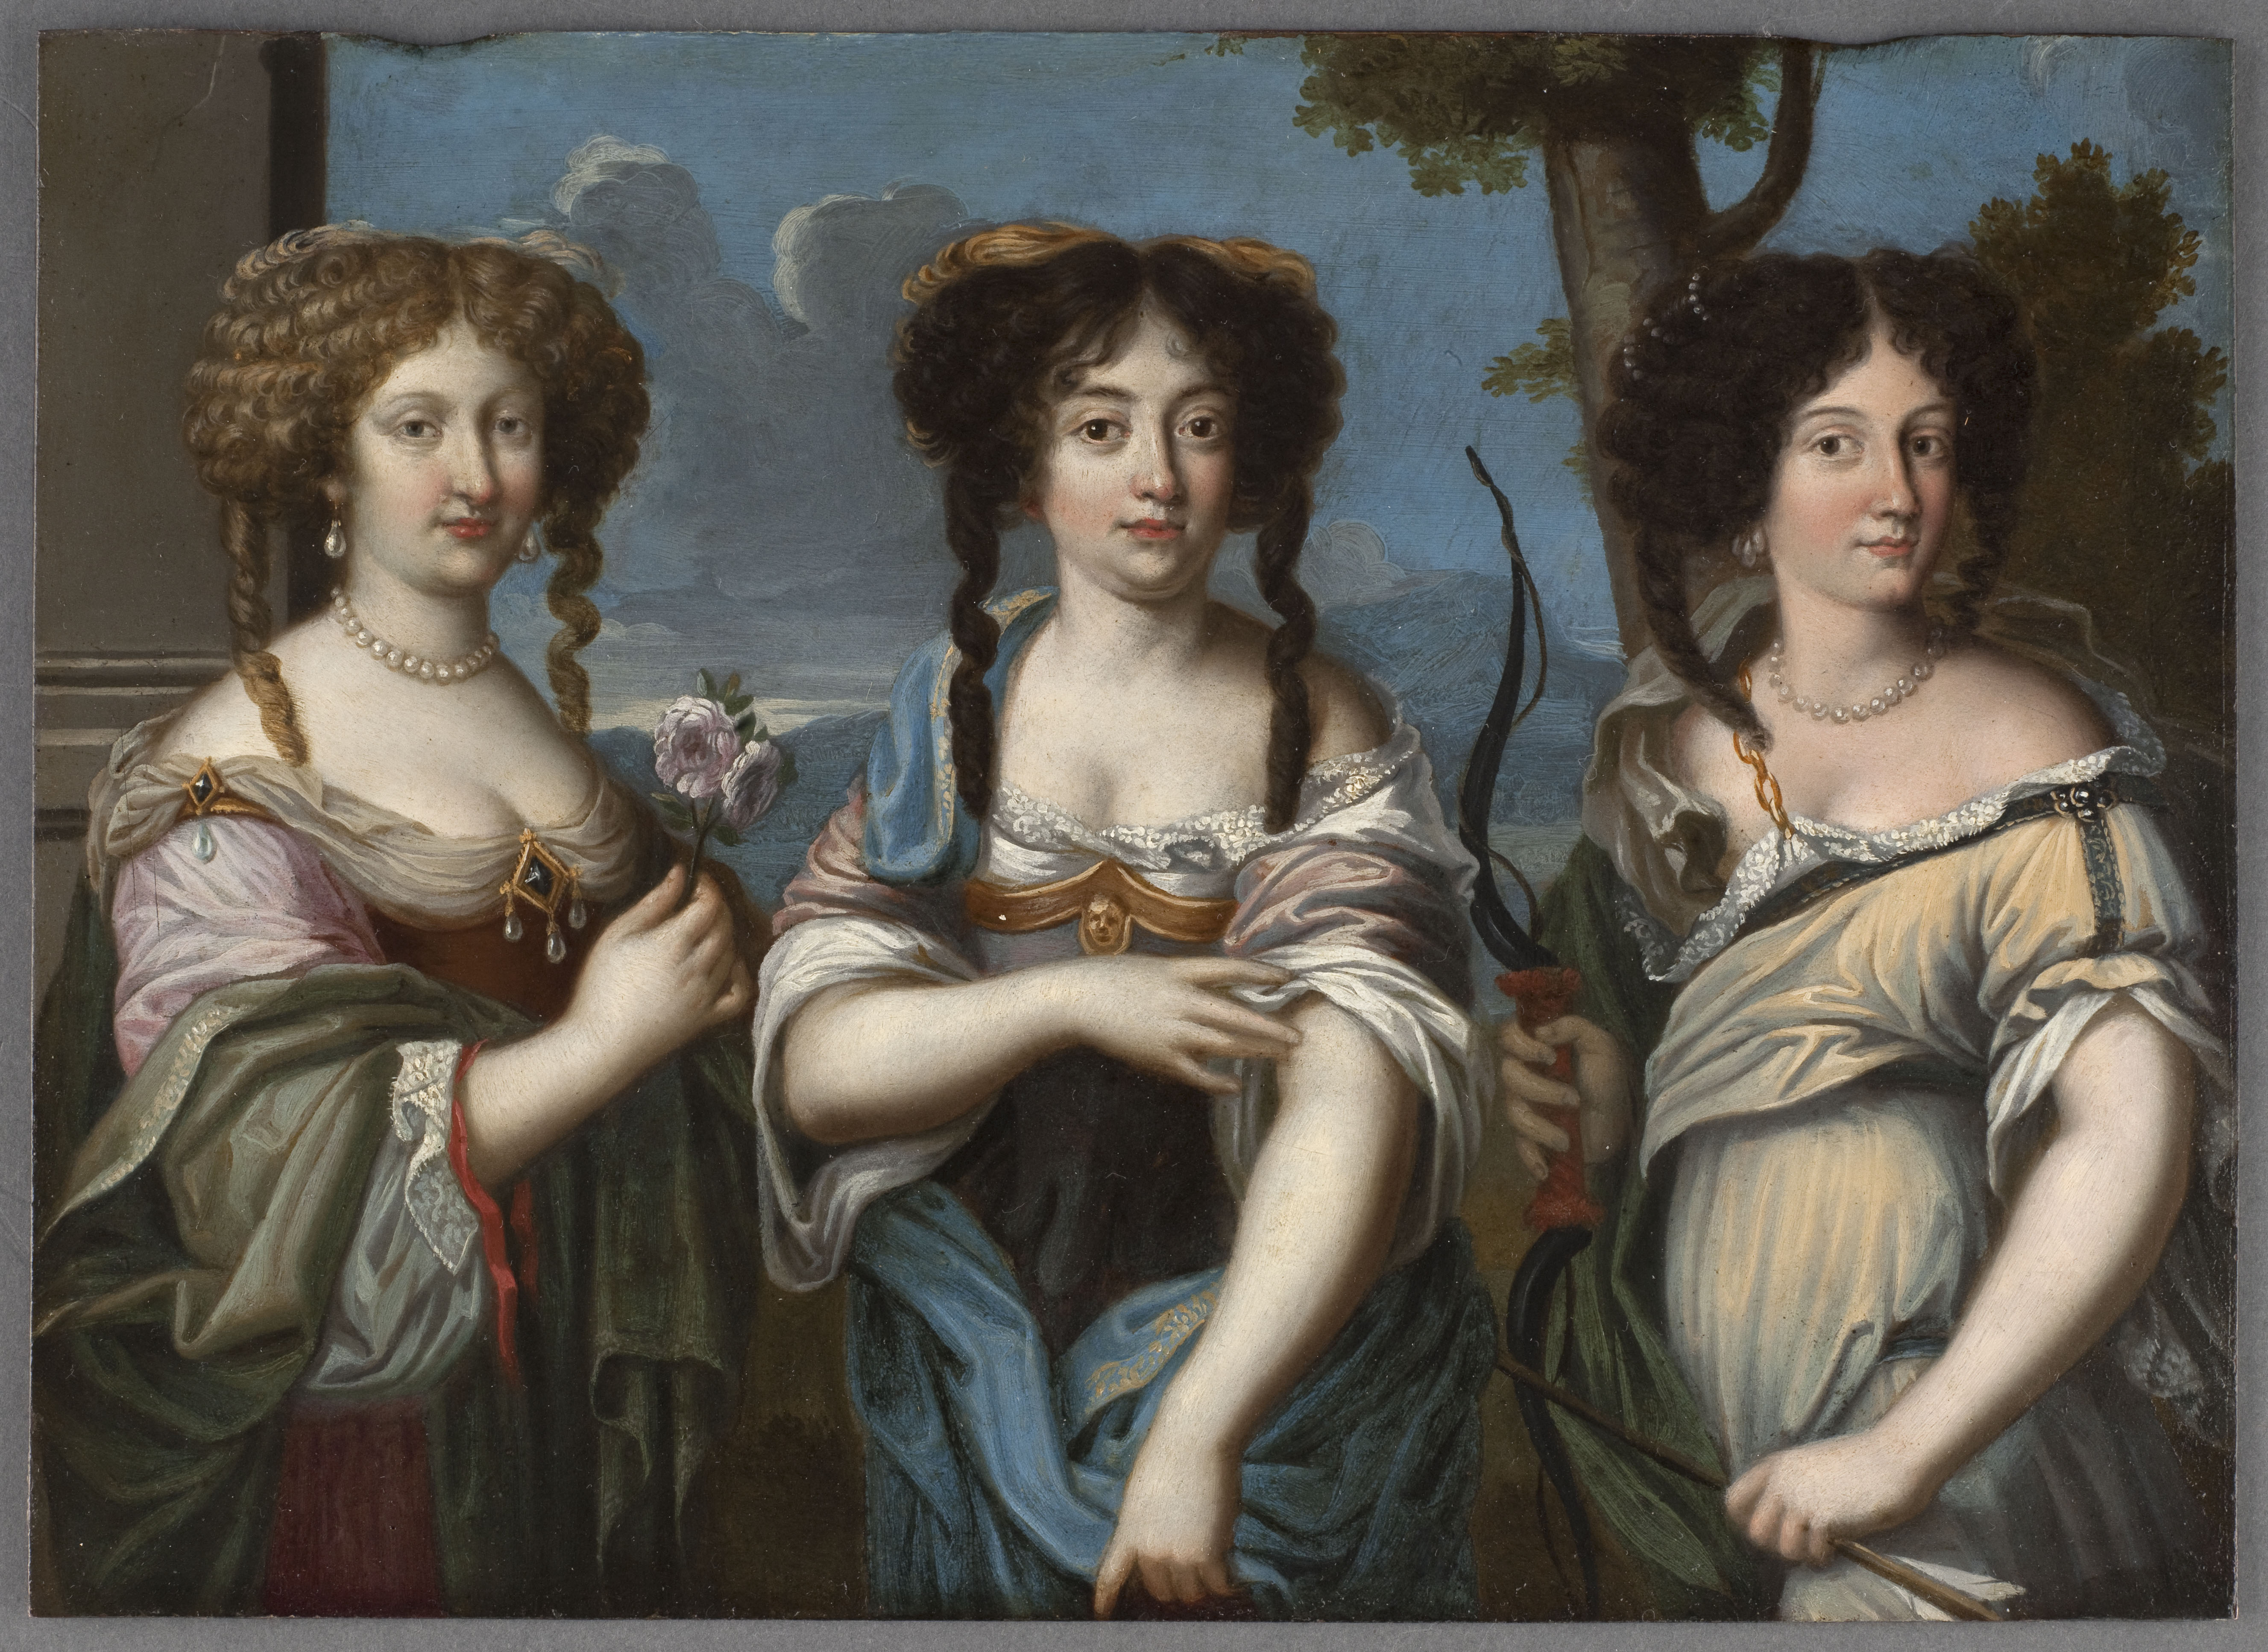 Marie, Olympe and Hortense Mancini